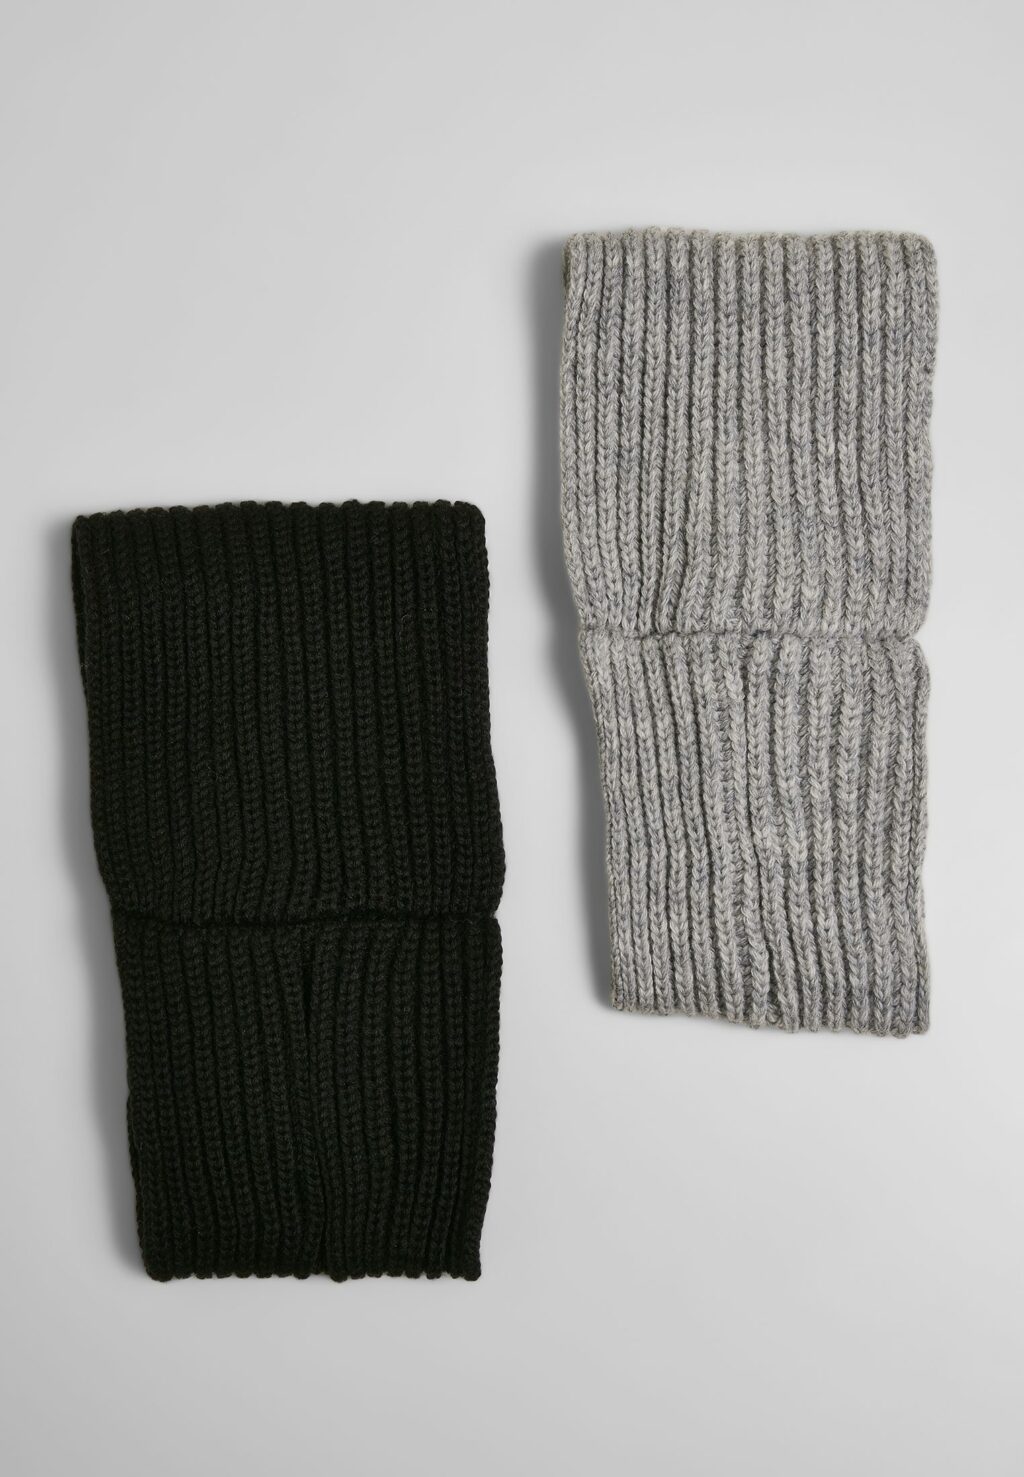 Knitted Headband 2-Pack black/grey one TB4865A